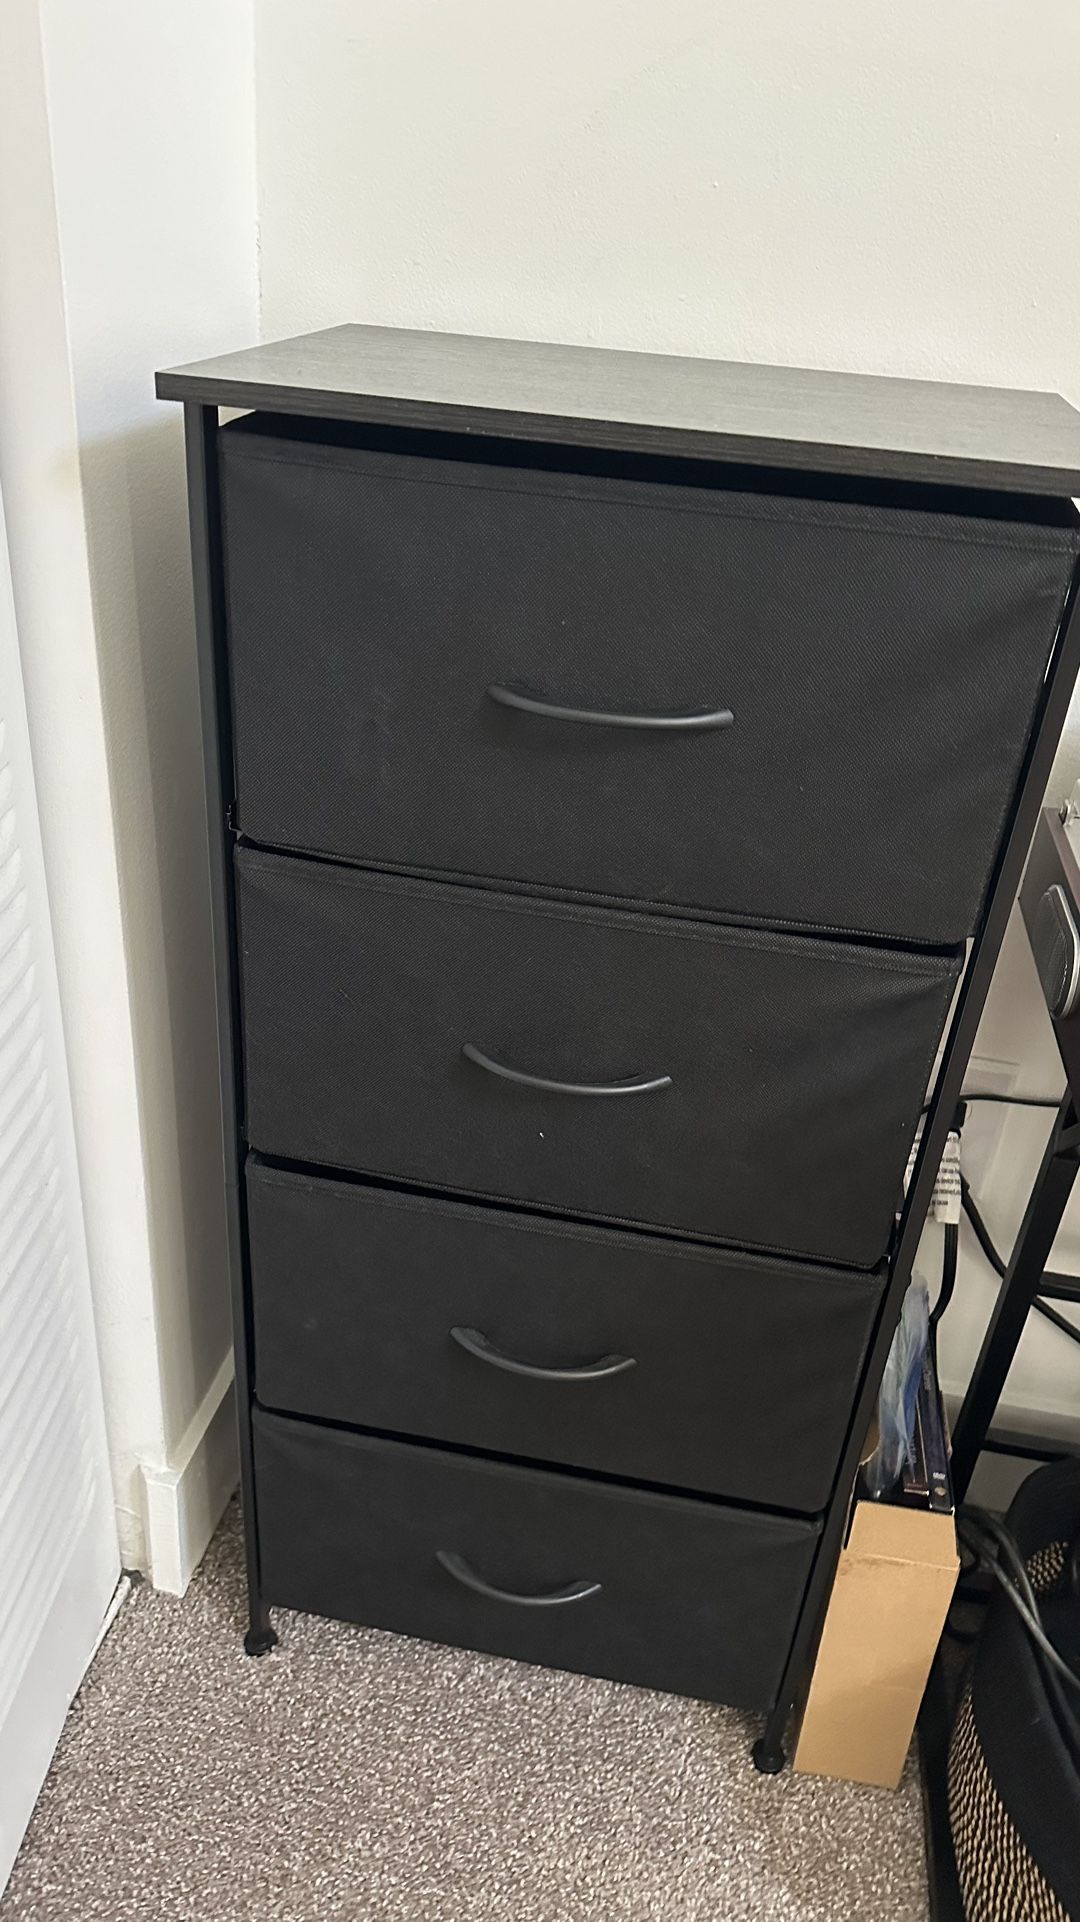 Dresser with 4 Drawers From Amazon